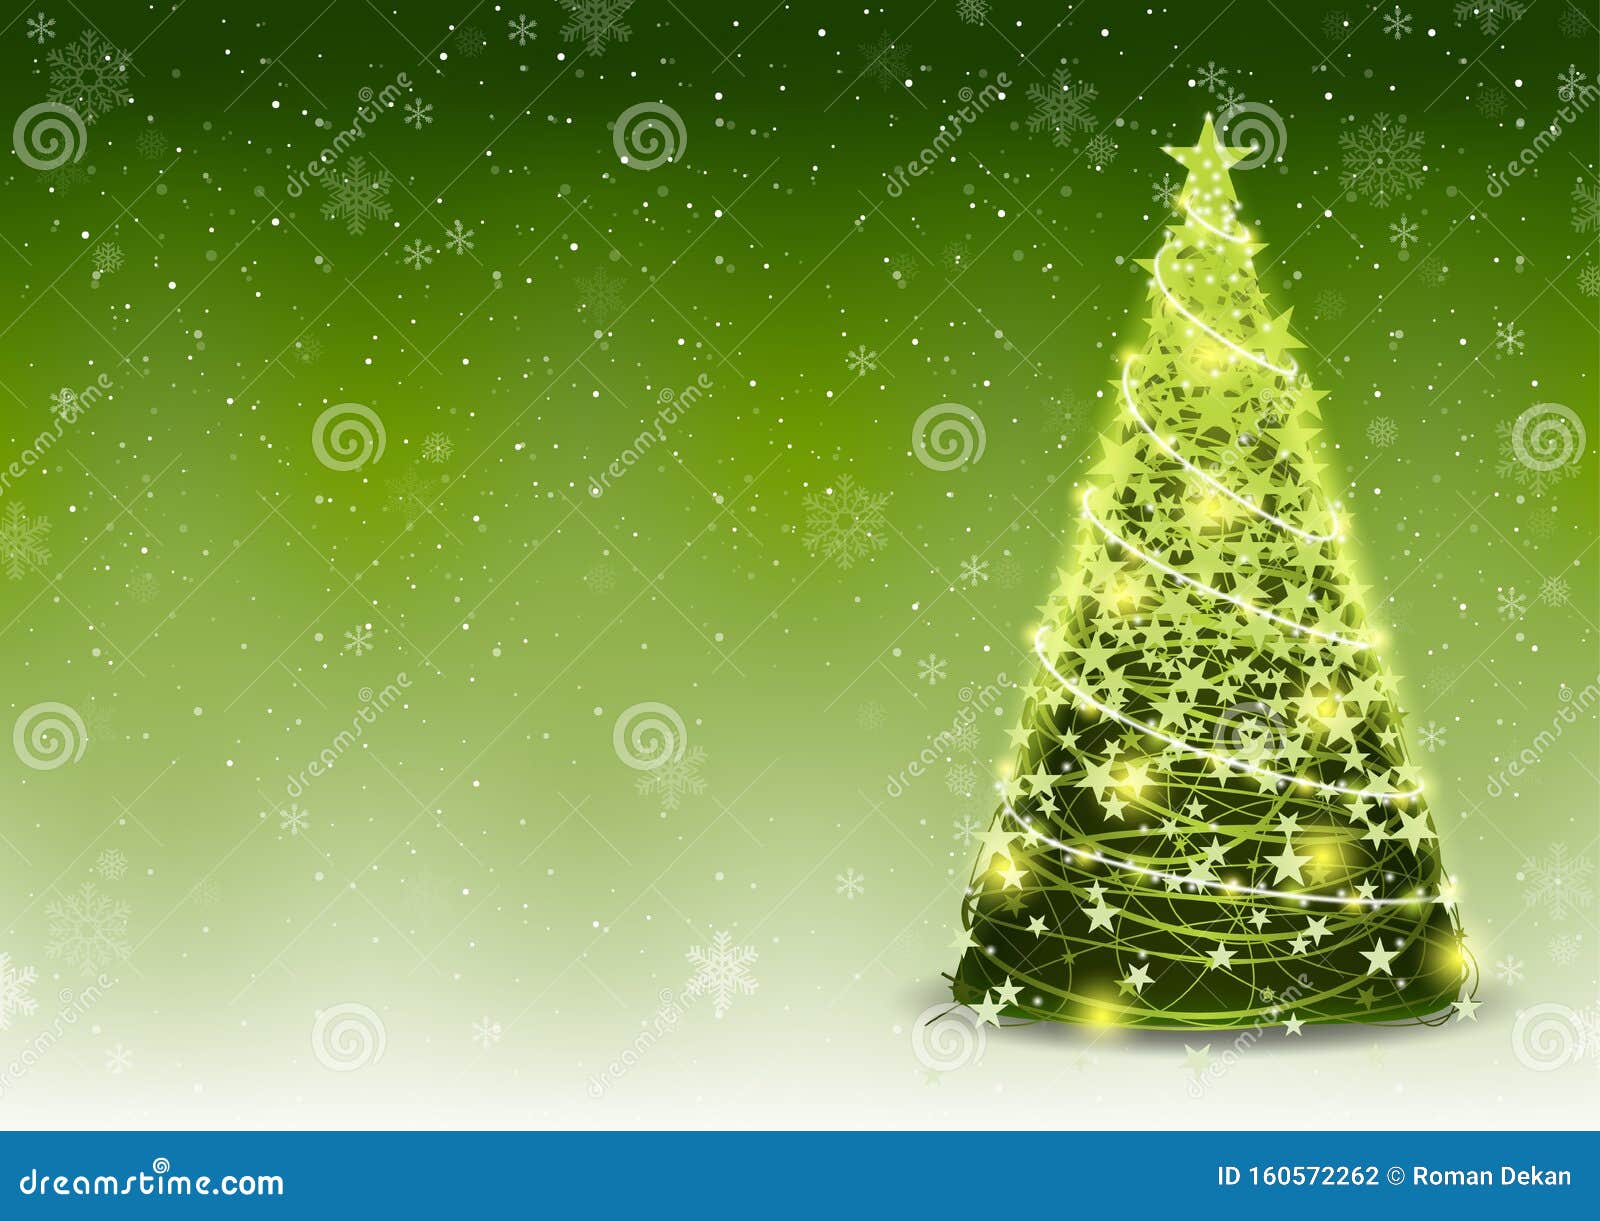 Green Christmas Tree Background with Falling Snowflakes Stock ...